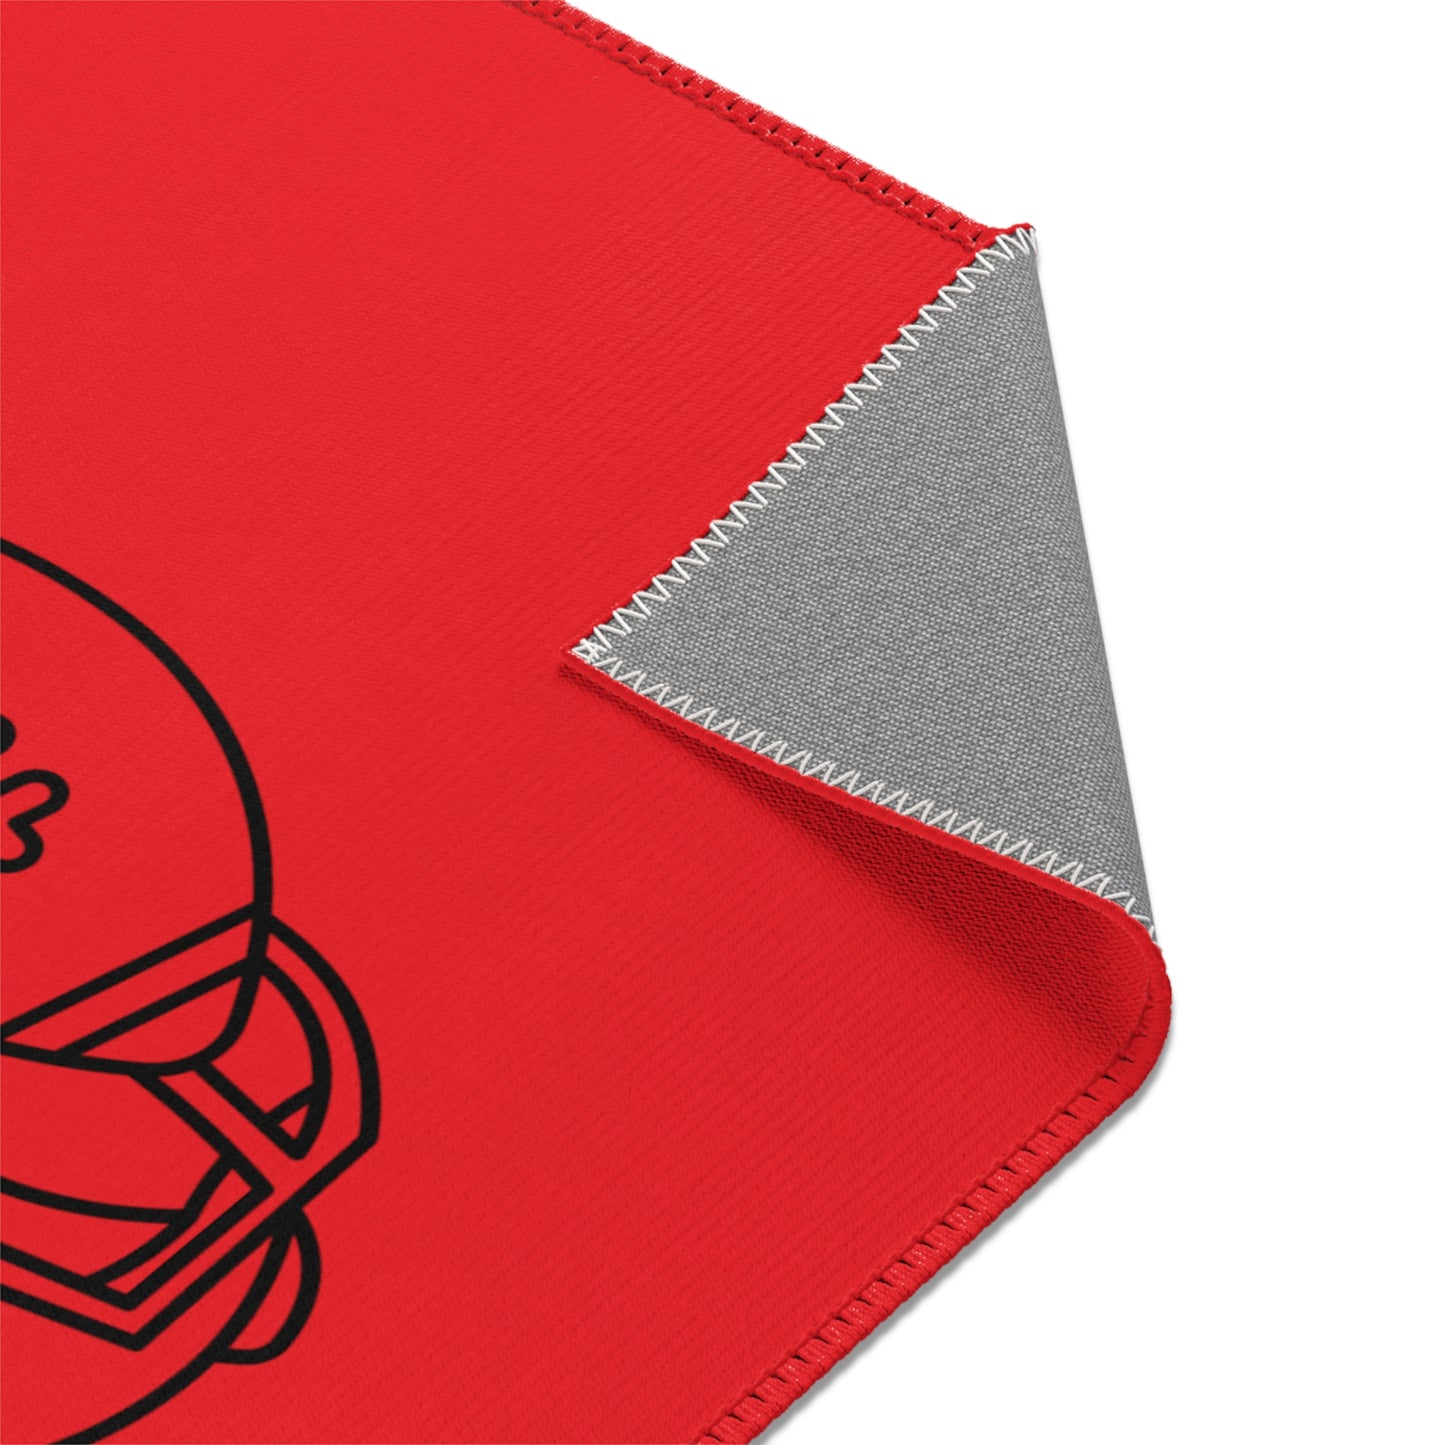 Area Rug (Rectangle): Football Red